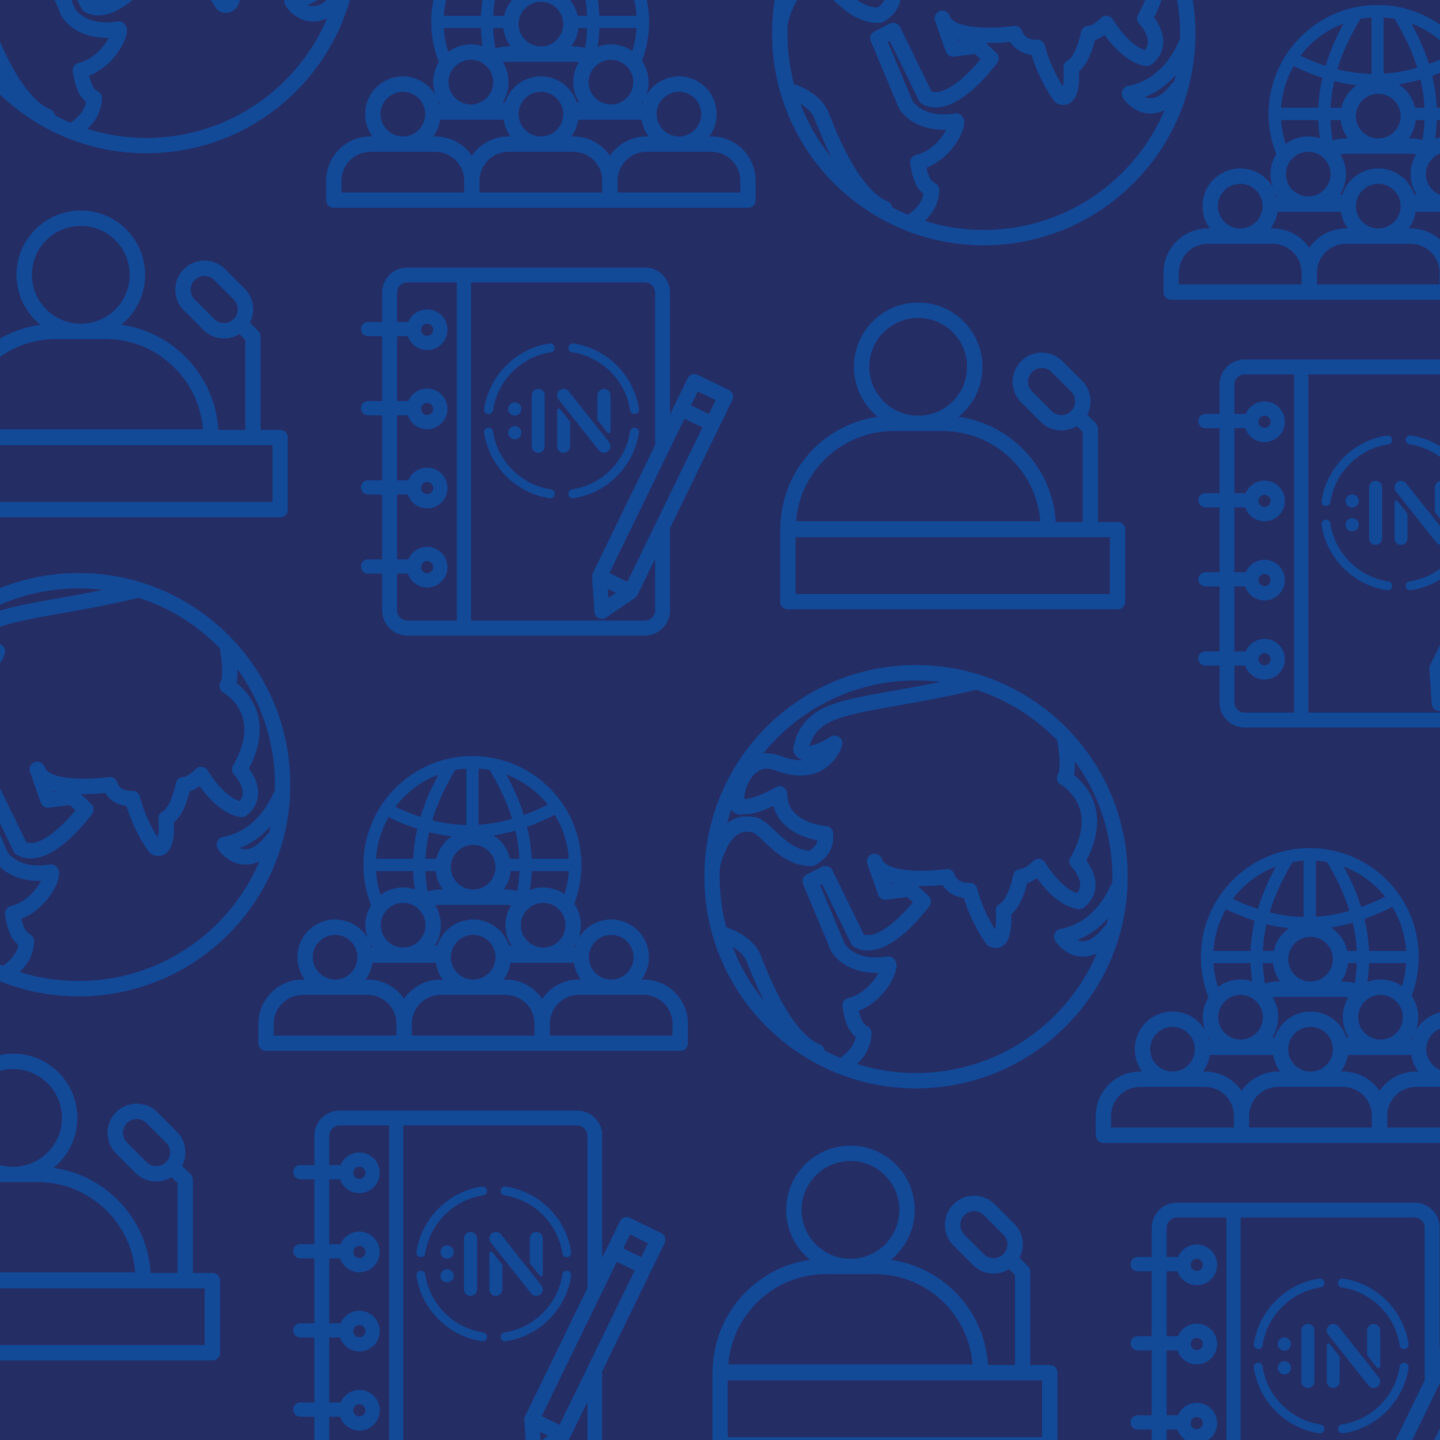 Series of blue outlined icons representing APAC, speakers, impact, and session agenda.